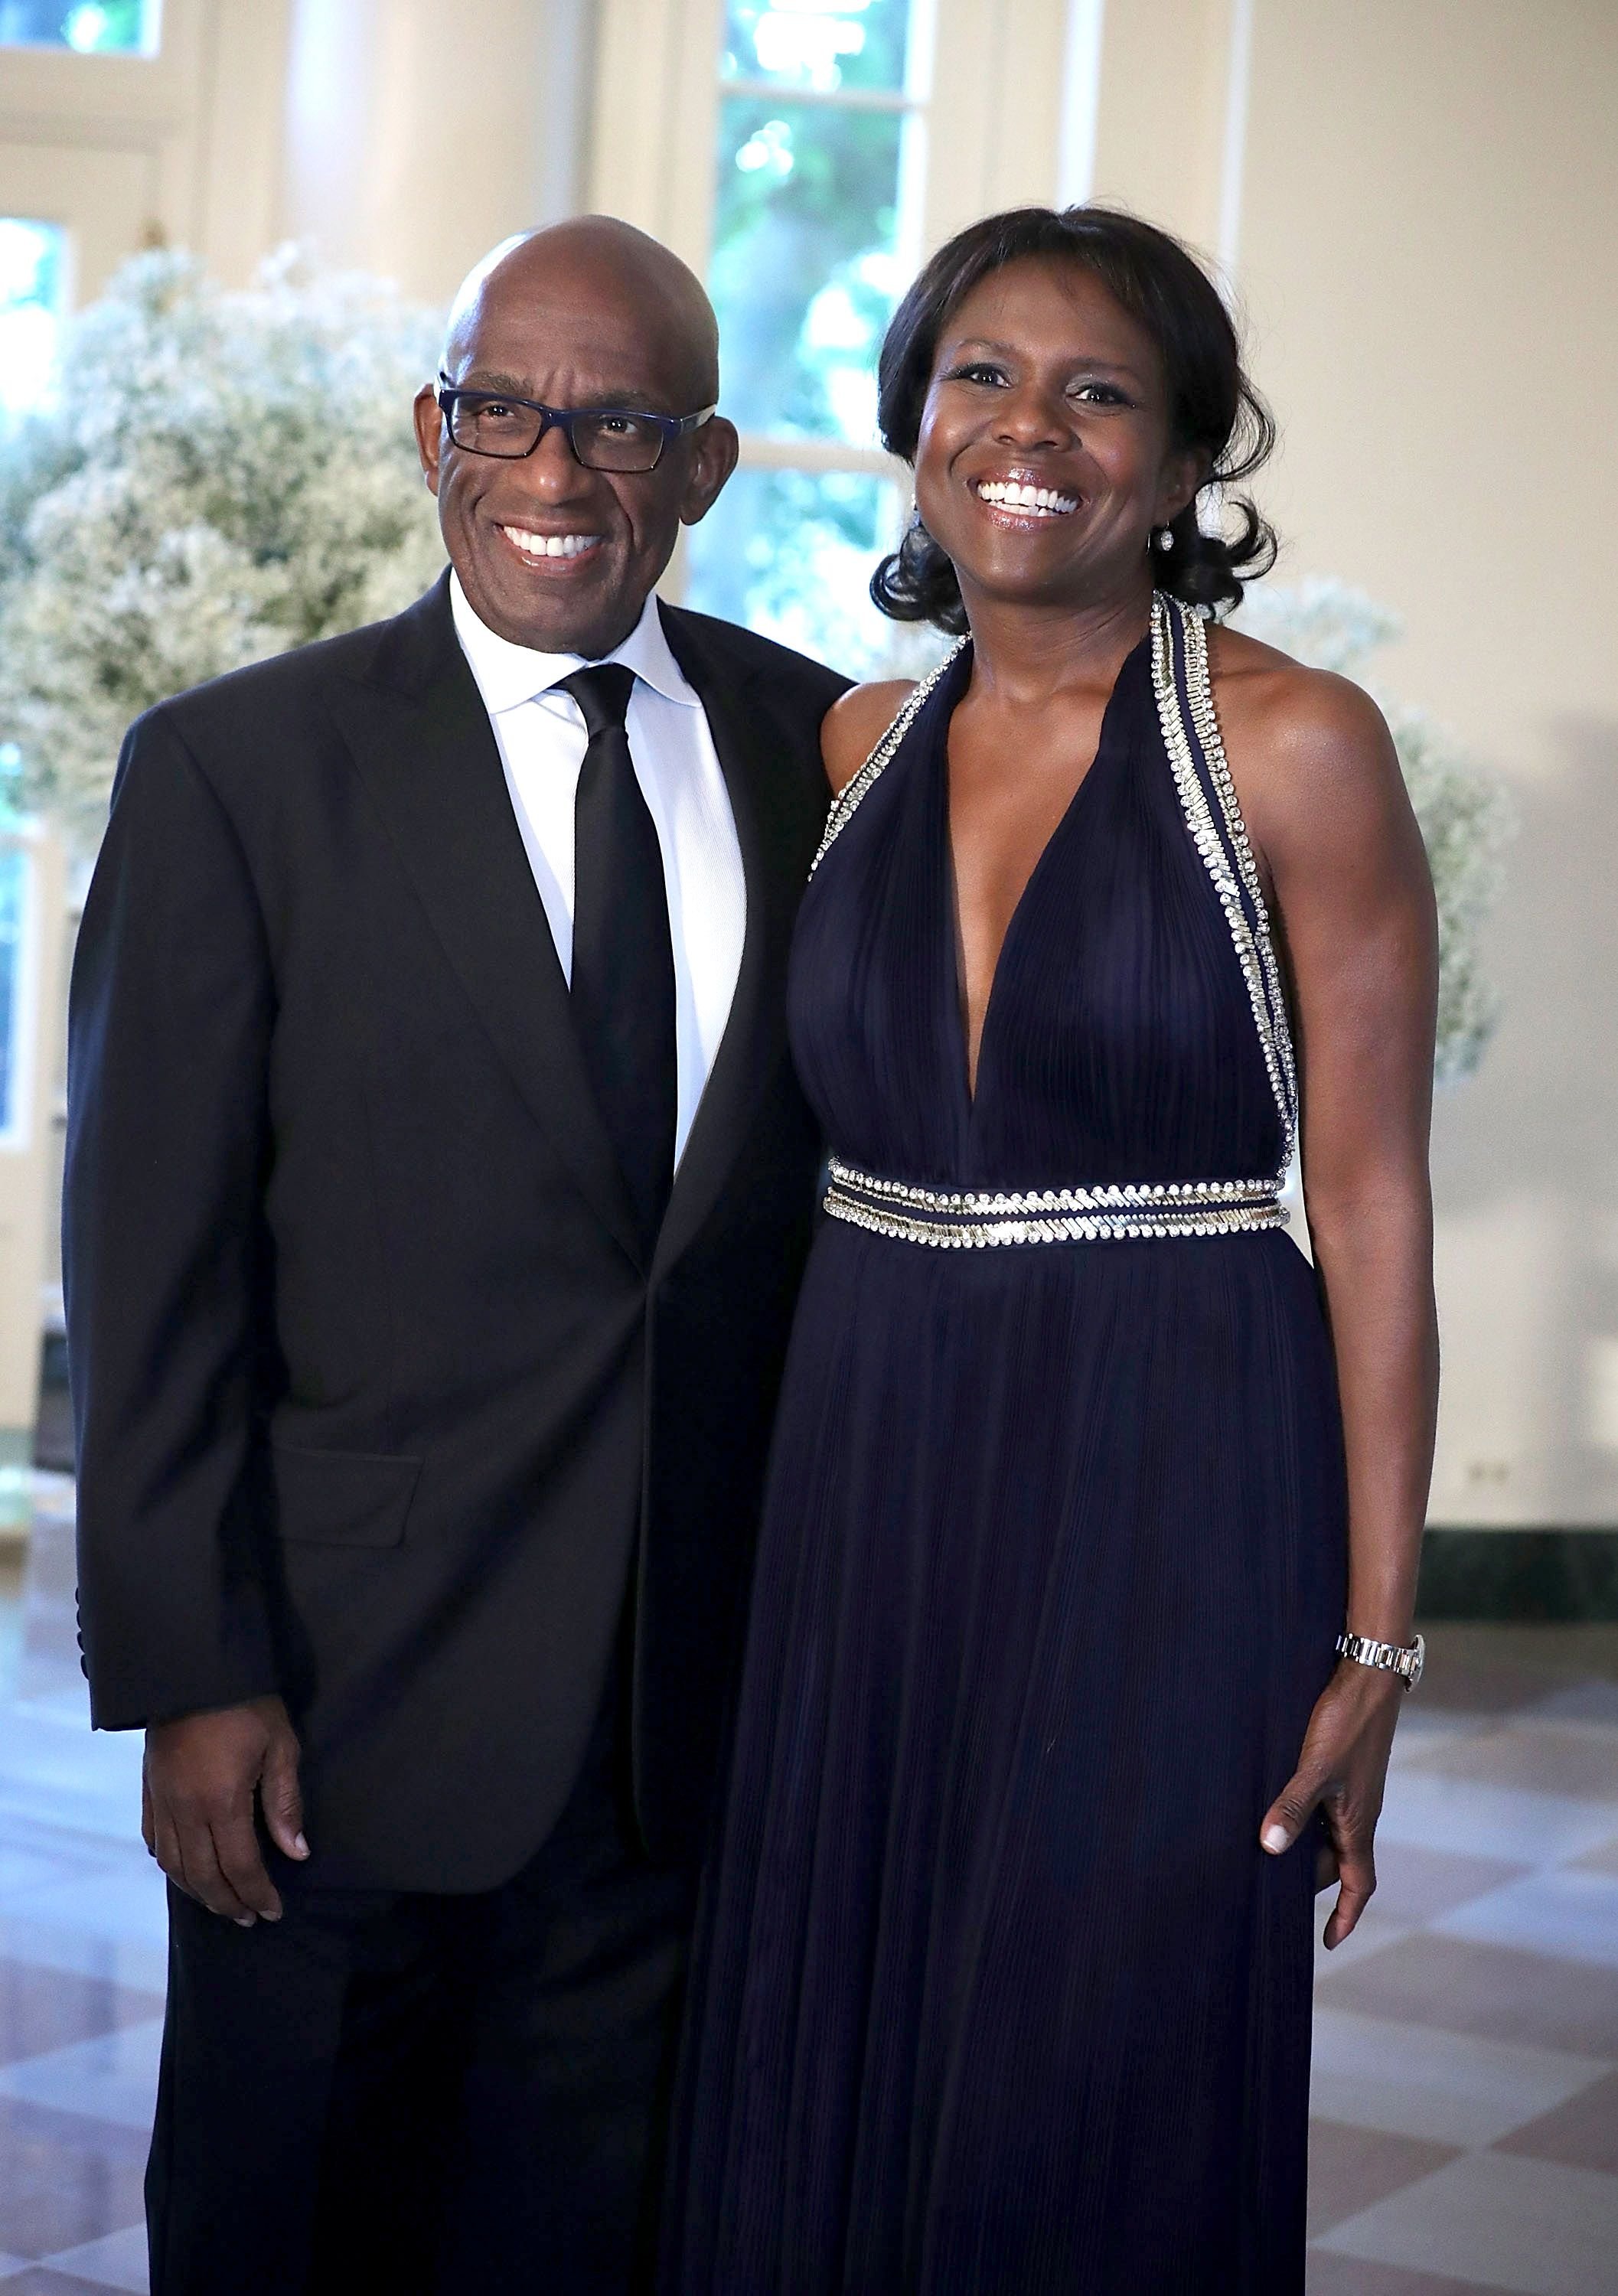 Al Roker and his wife Deborah Roberts arrive at a Nordic State Dinner May 13, 2016 at the White House in Washington. | Photo: Getty Images.